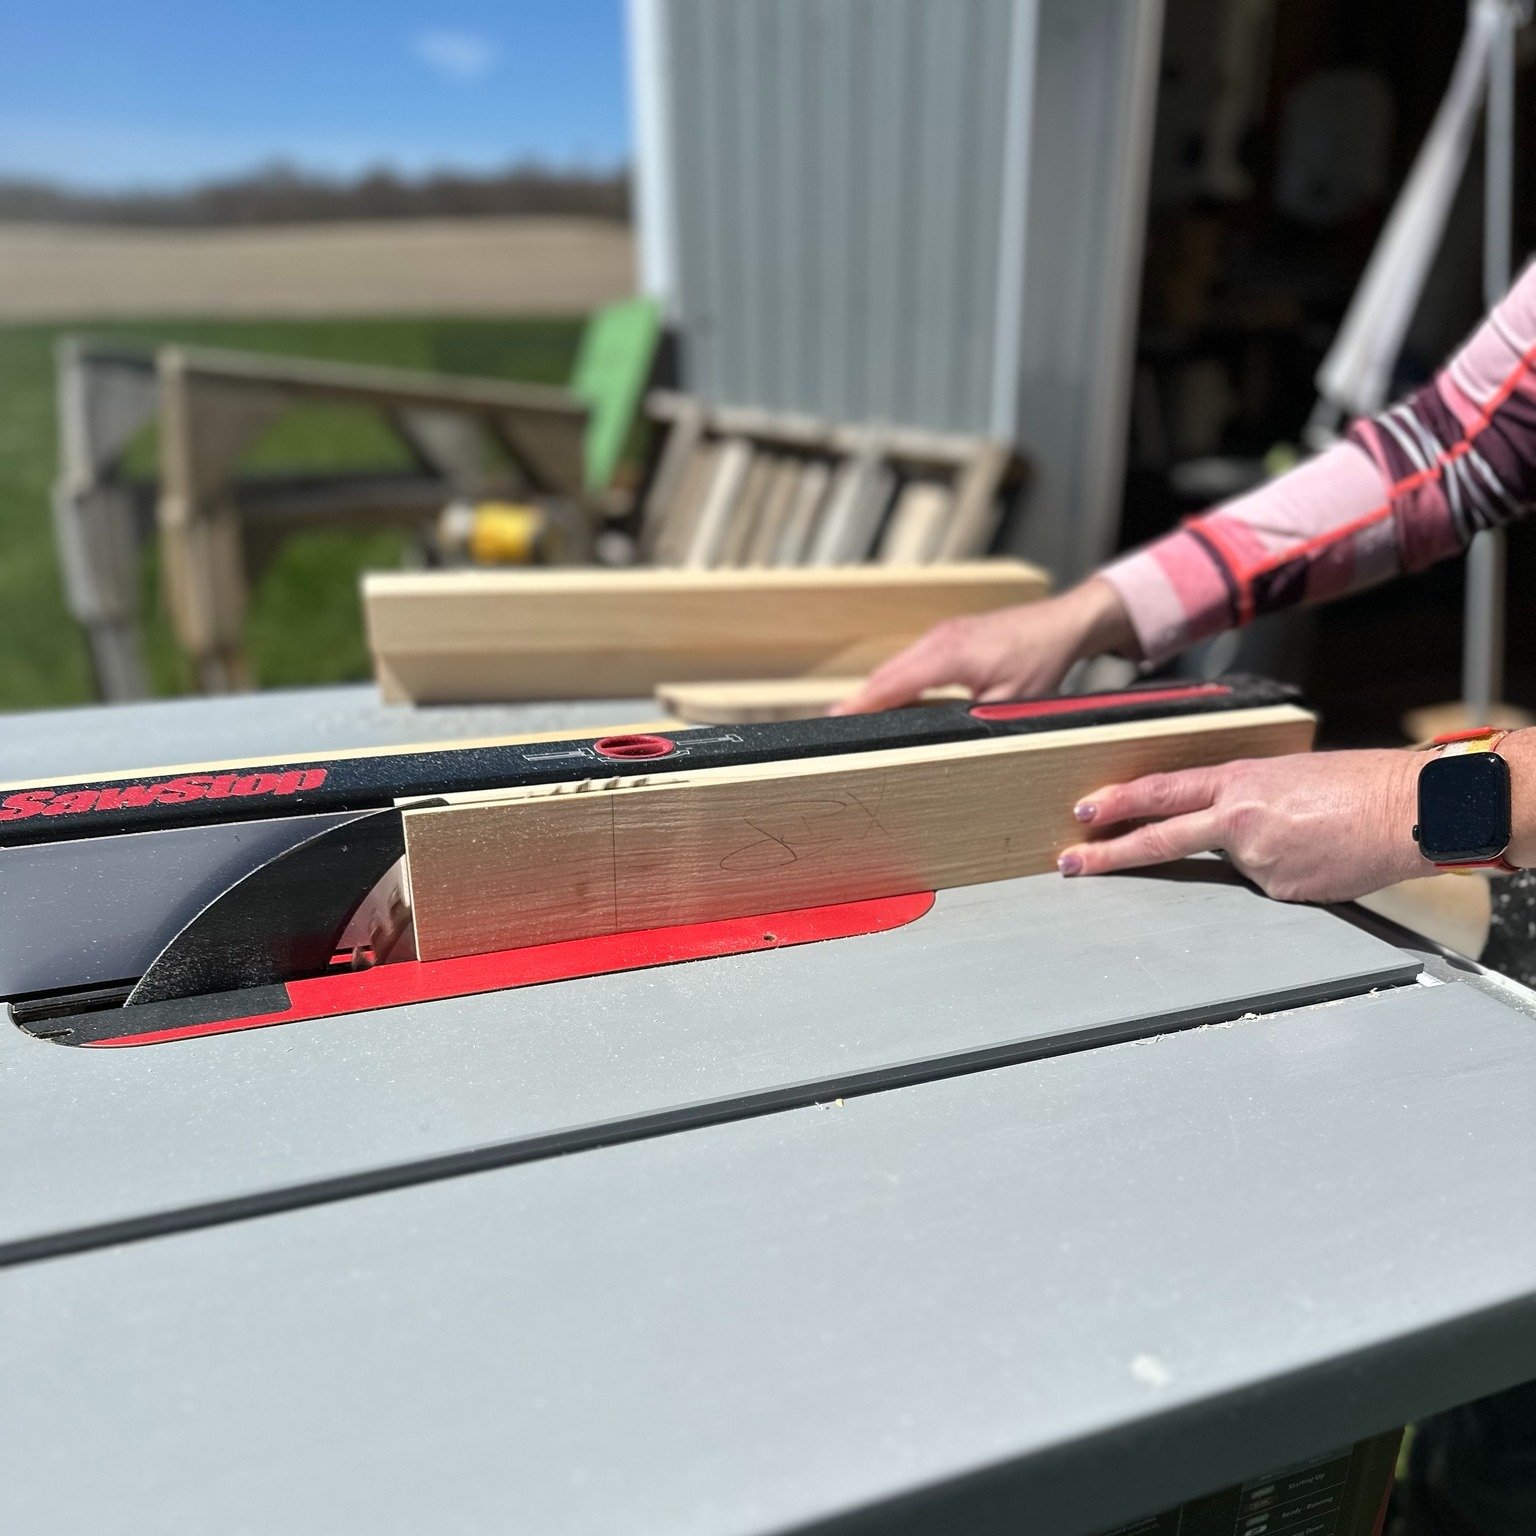 We enjoyed some beautiful weather last Friday while teaching our Table Saw Fundamentals class. In this class, we highlight safe techniques for using an inherently dangerous tool, while getting in lots of practice ripping and cross cutting. Students b